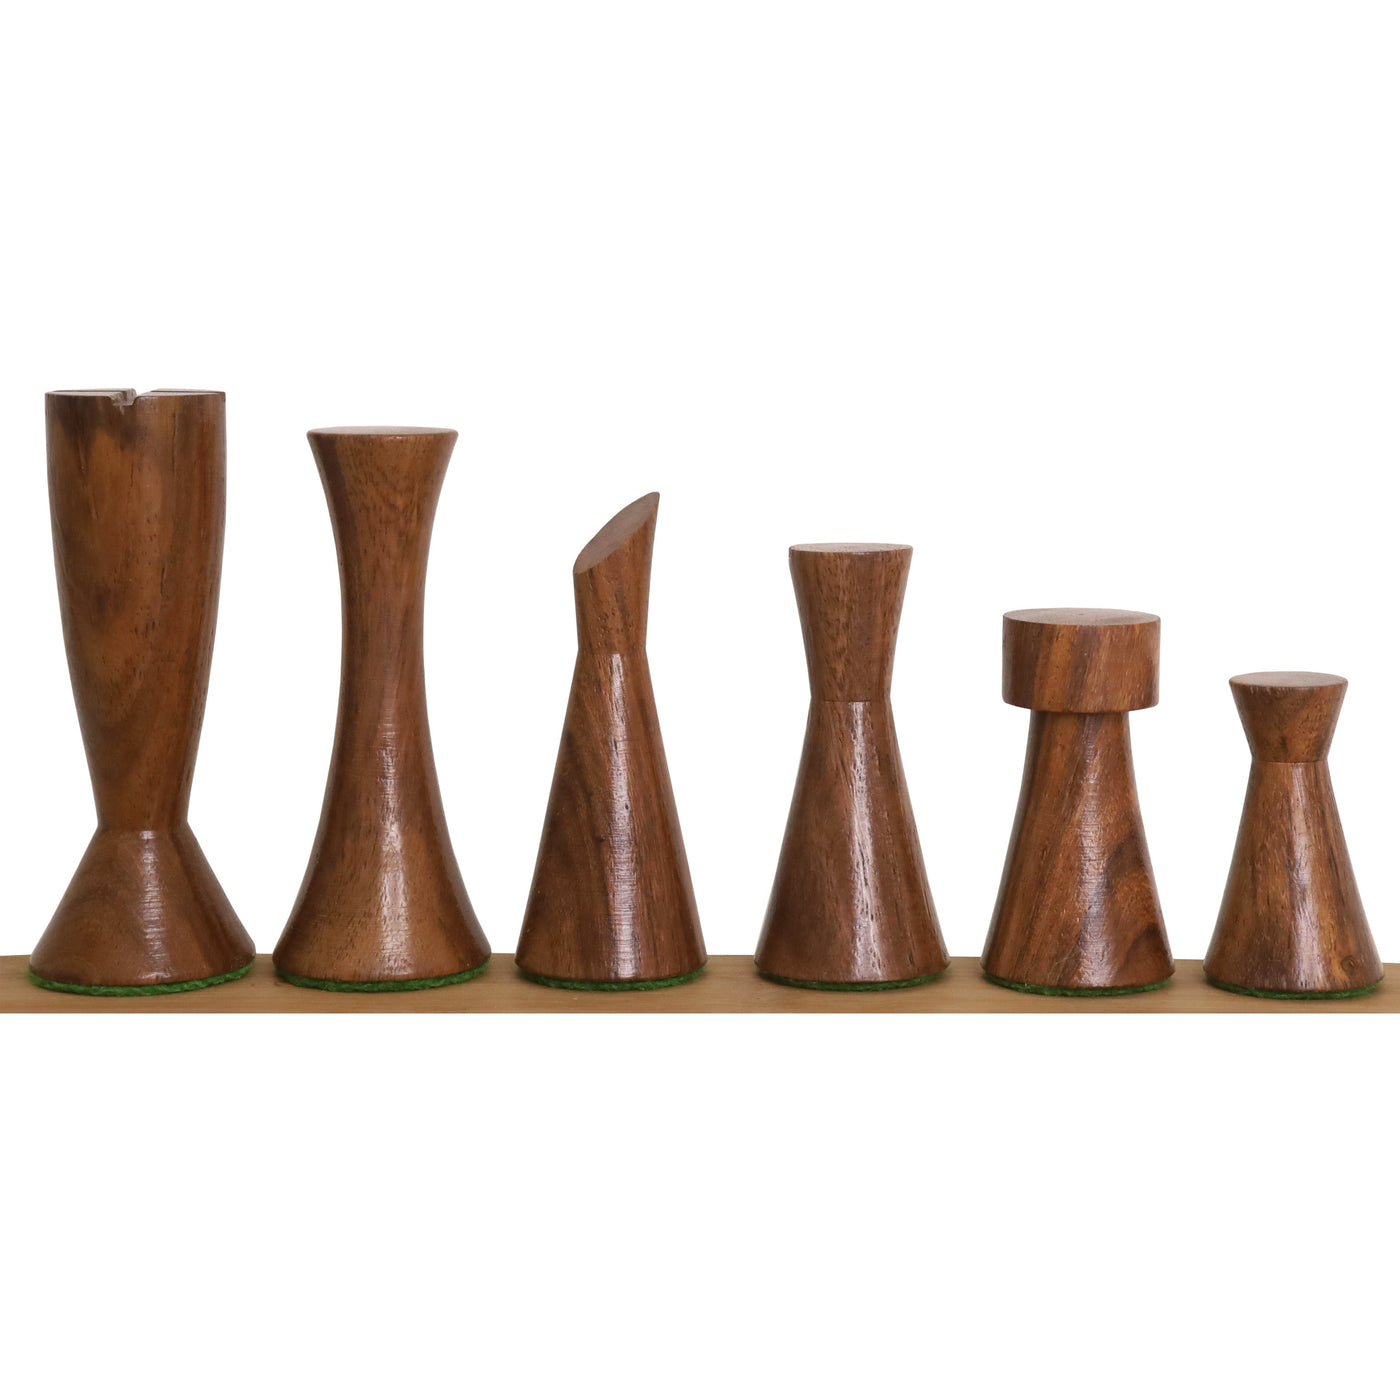 3.4" Minimalist Tower Series Weighted Chess Pieces with Borderless Hardwood End Grain Chess Board - Golden Rosewood